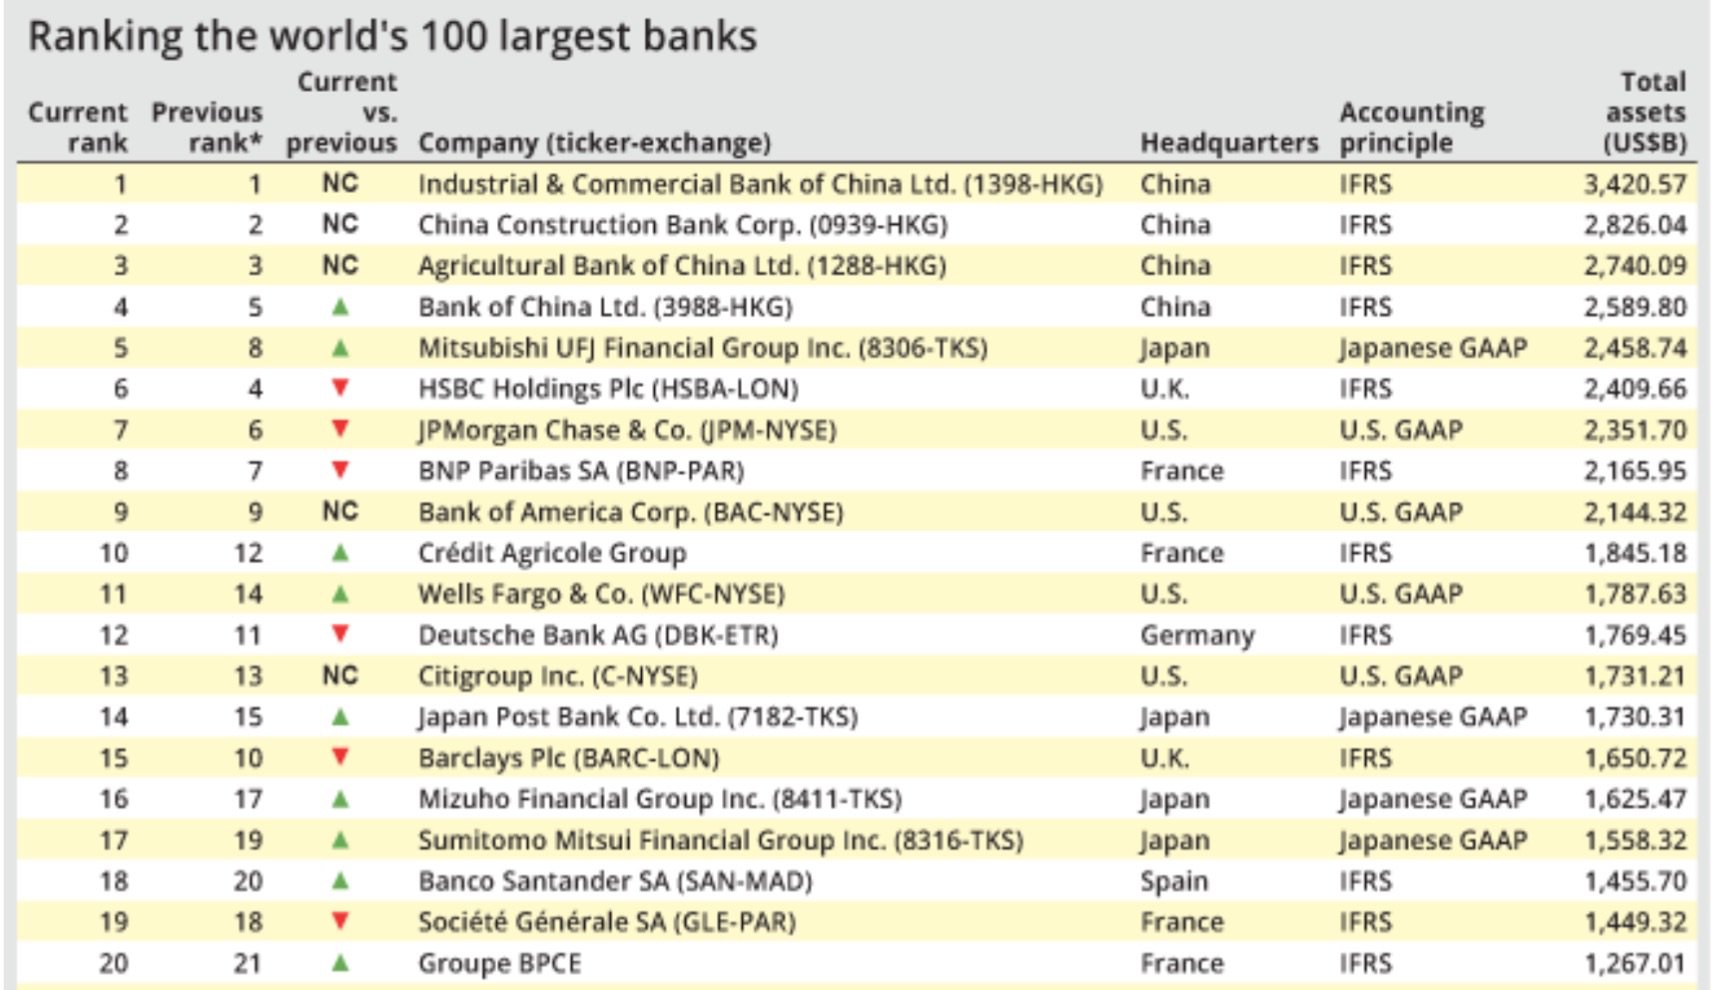 Patrick McGee on Twitter: "Top 100 banks in the by assets - new ranking from Global Market Intelligence. Biggest 5 are Asian. https://t.co/DGjGA8n4Jq" / Twitter